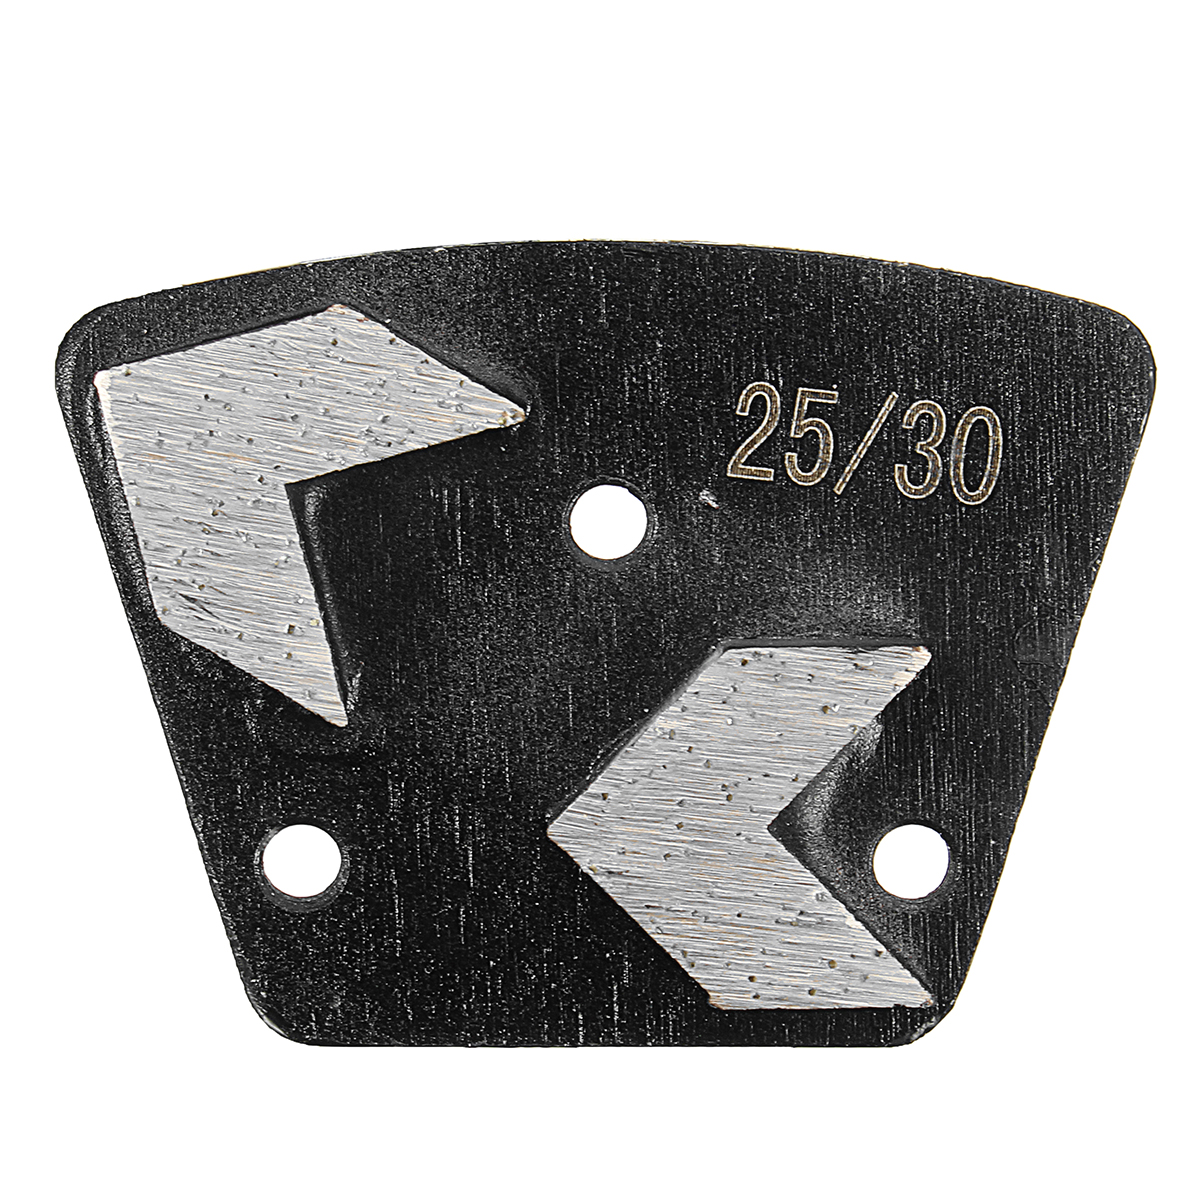 2530-Grit-Medium-Bond-Plate-Trapezoid-Grinding-Disc-for-Bolt-On-Grinders-1349216-2